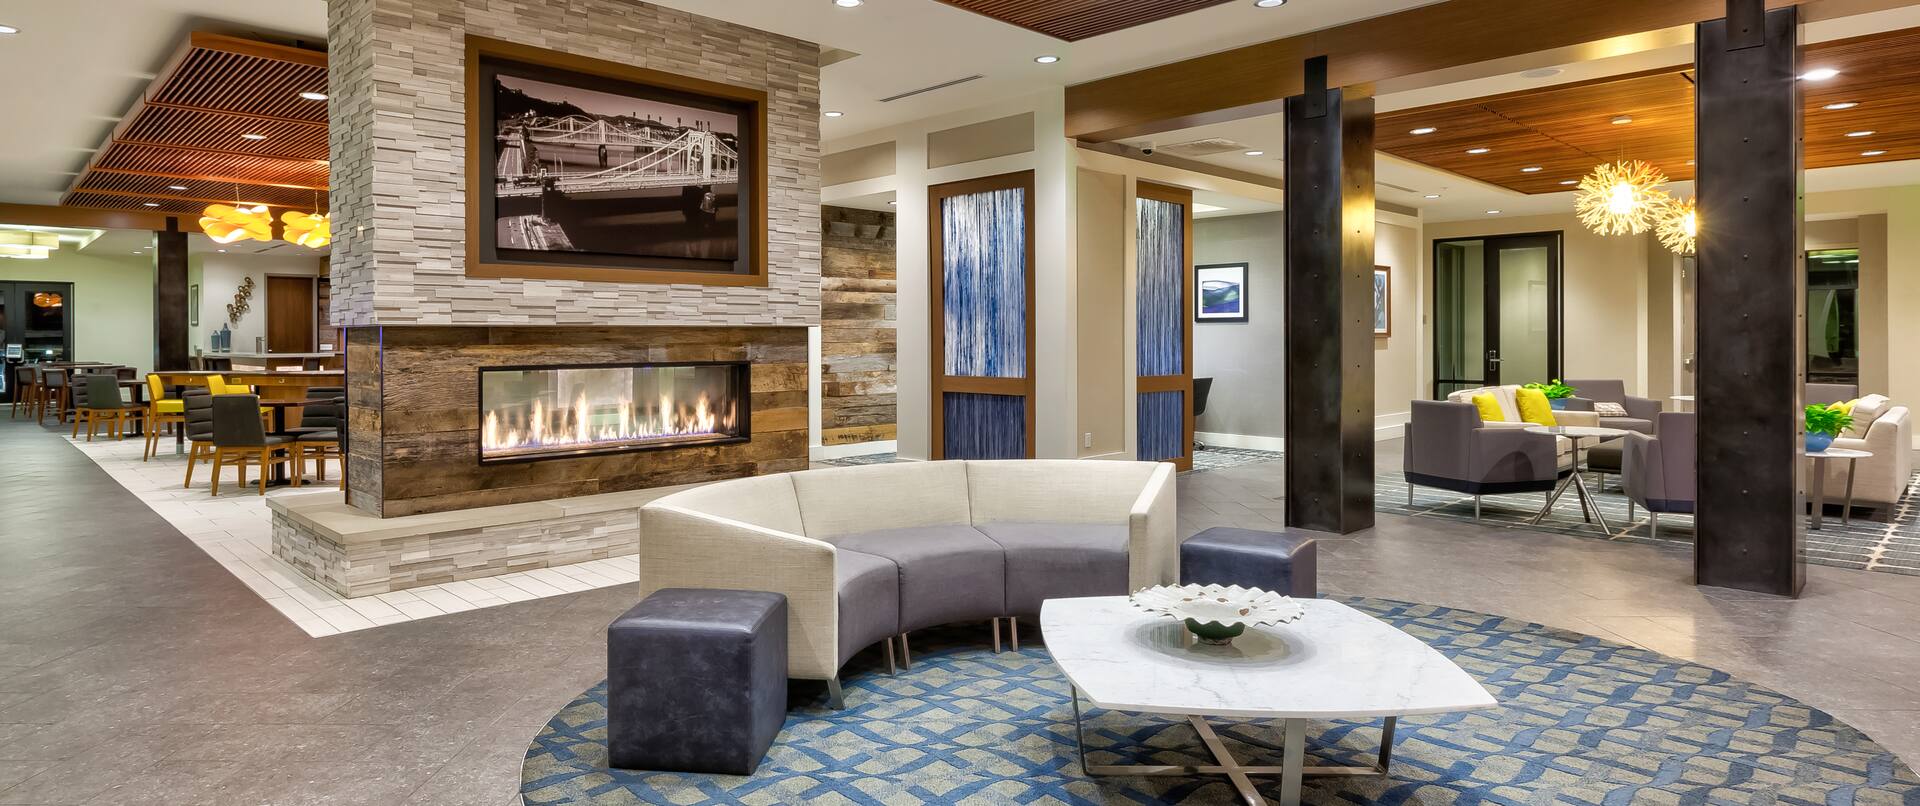 Sit back and relax by our lobby fireplace